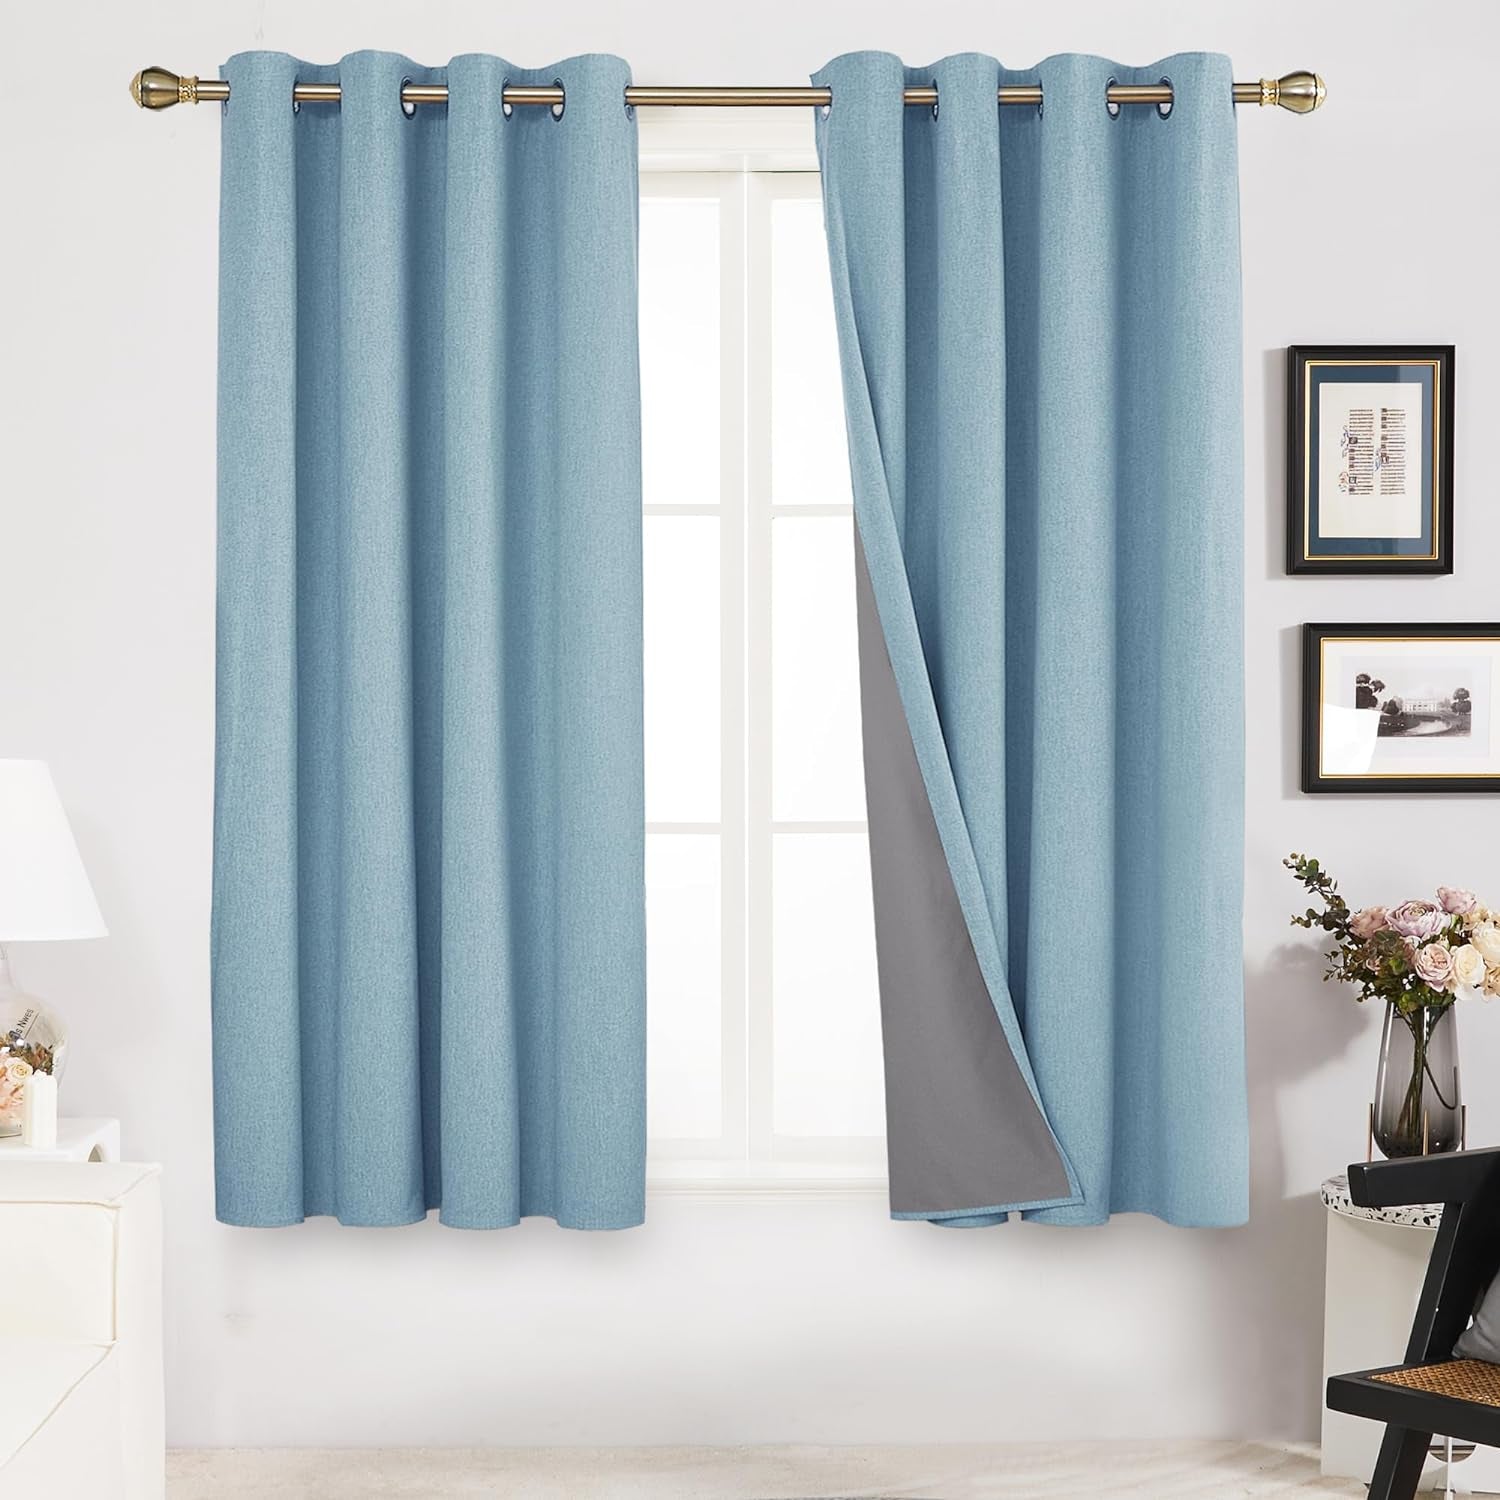 Deconovo Linen Blackout Curtains 84 Inch Length Set of 2, Thermal Curtain Drapes with Grey Coating, Total Light Blocking Waterproof Curtains for Indoor/Outdoor (Light Grey, 52W X 84L Inch)  Deconovo Teal 52X45 Inches 